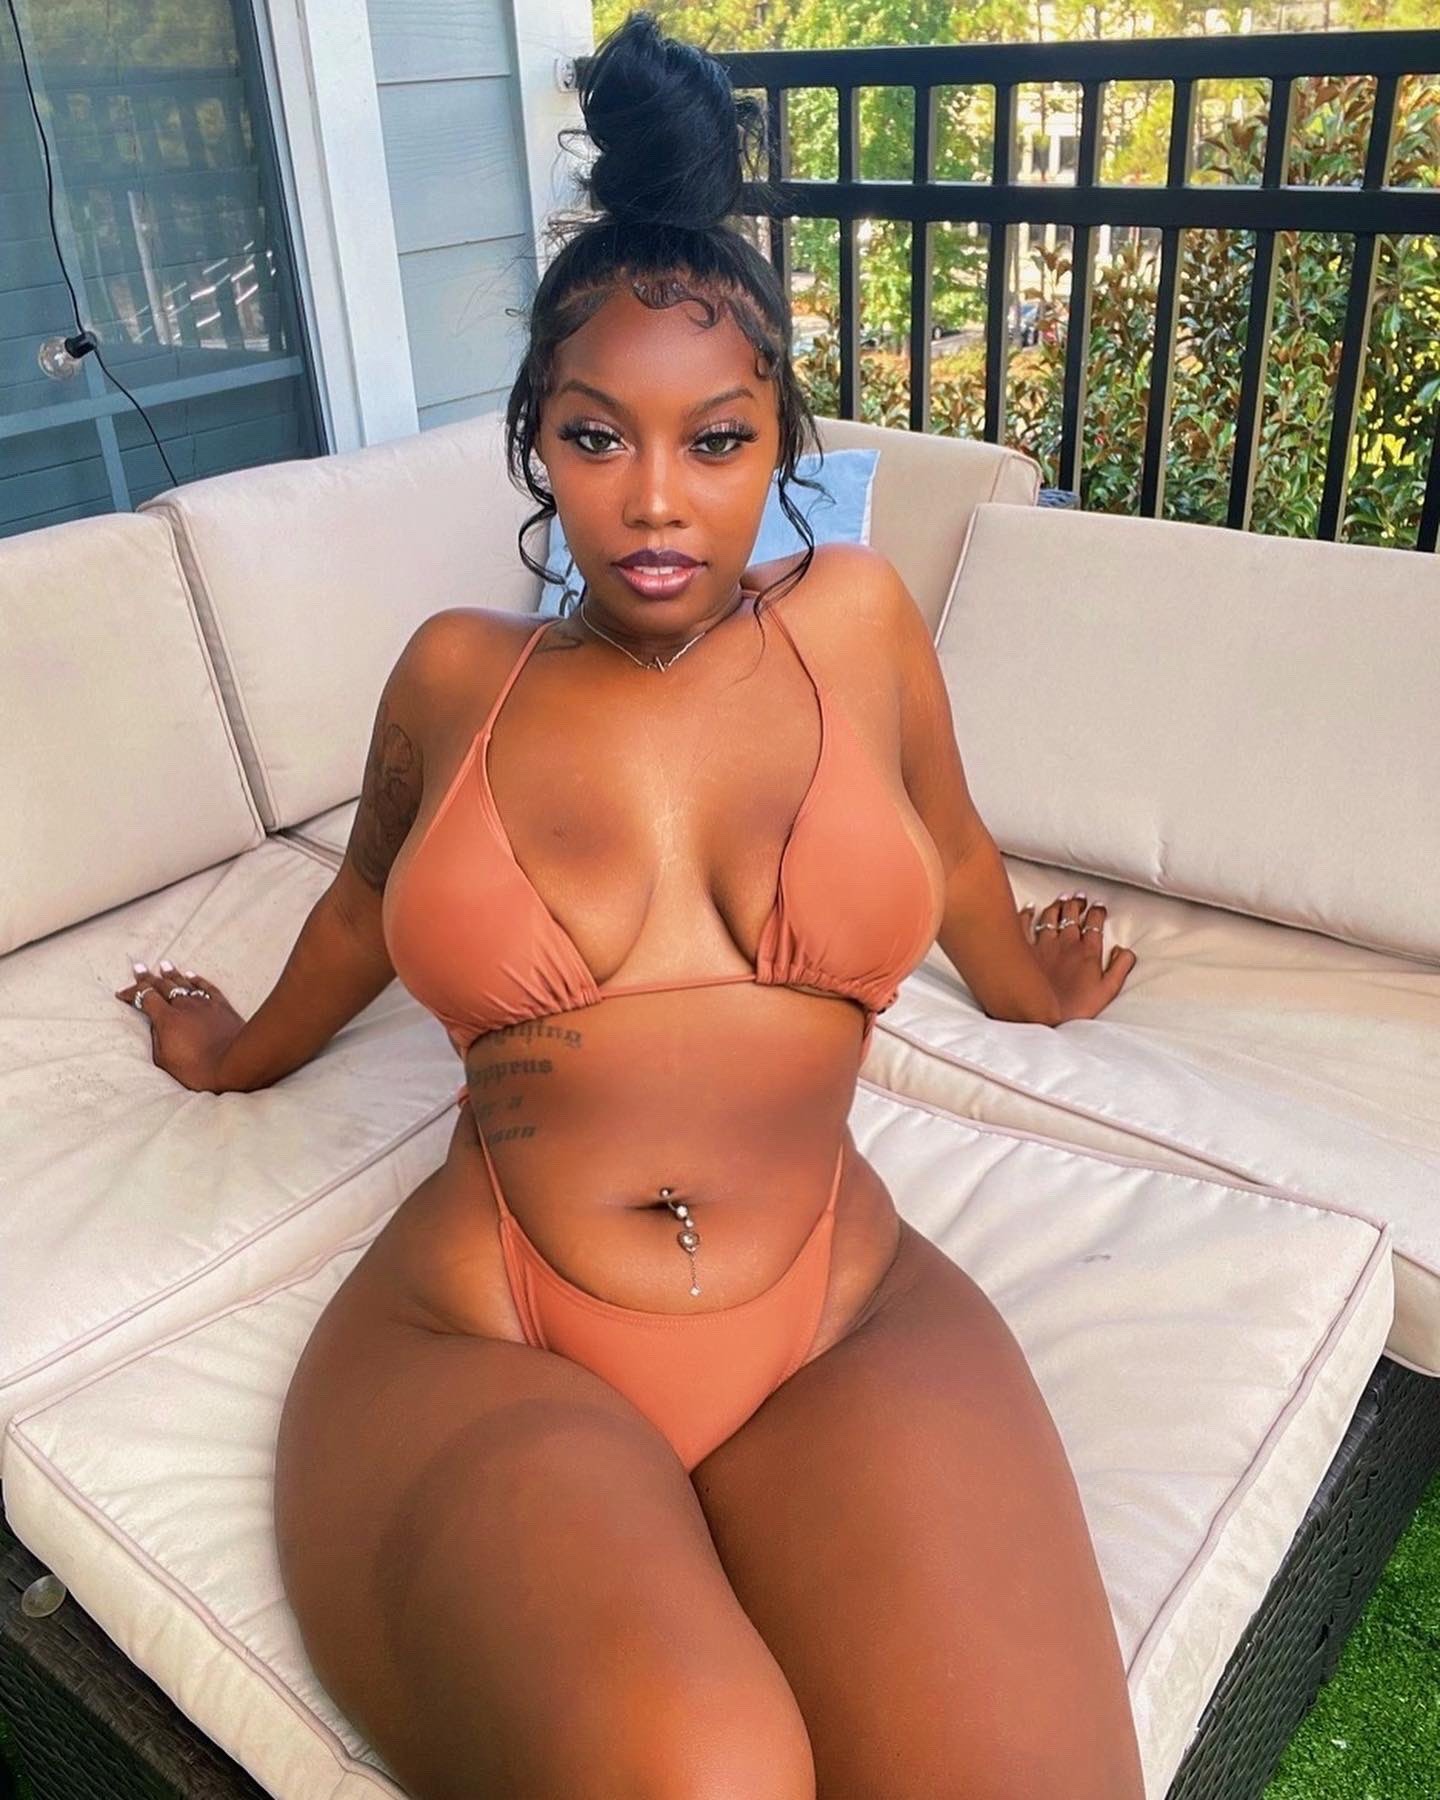 Porn melaninglamour:Here comes that sound again photos